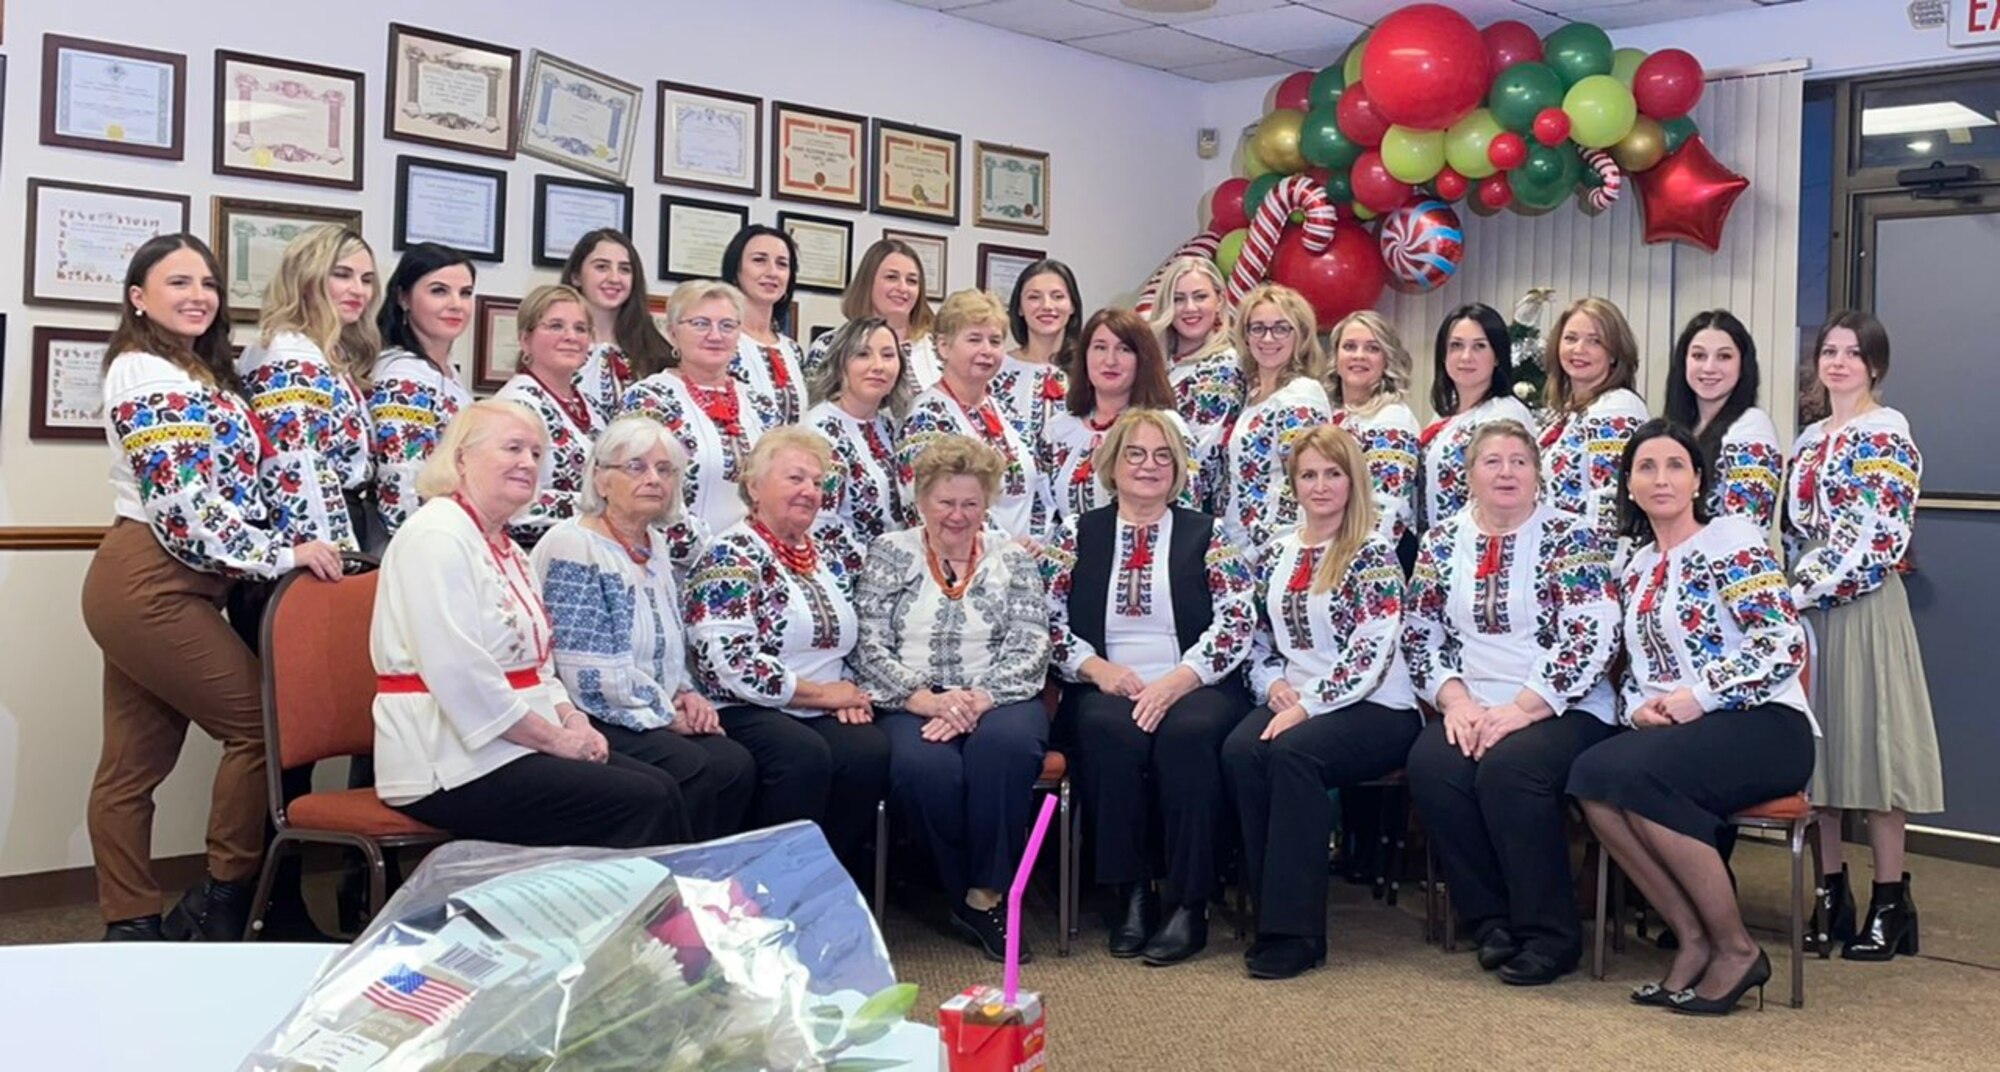 Senior Airman Viktoria Senkiv (far left), a fireteam member assigned to the 910th Security Forces Squadron, poses for a photo with the Ukrainian National Women’s League of America’s 76th branch in Detroit, Michigan.